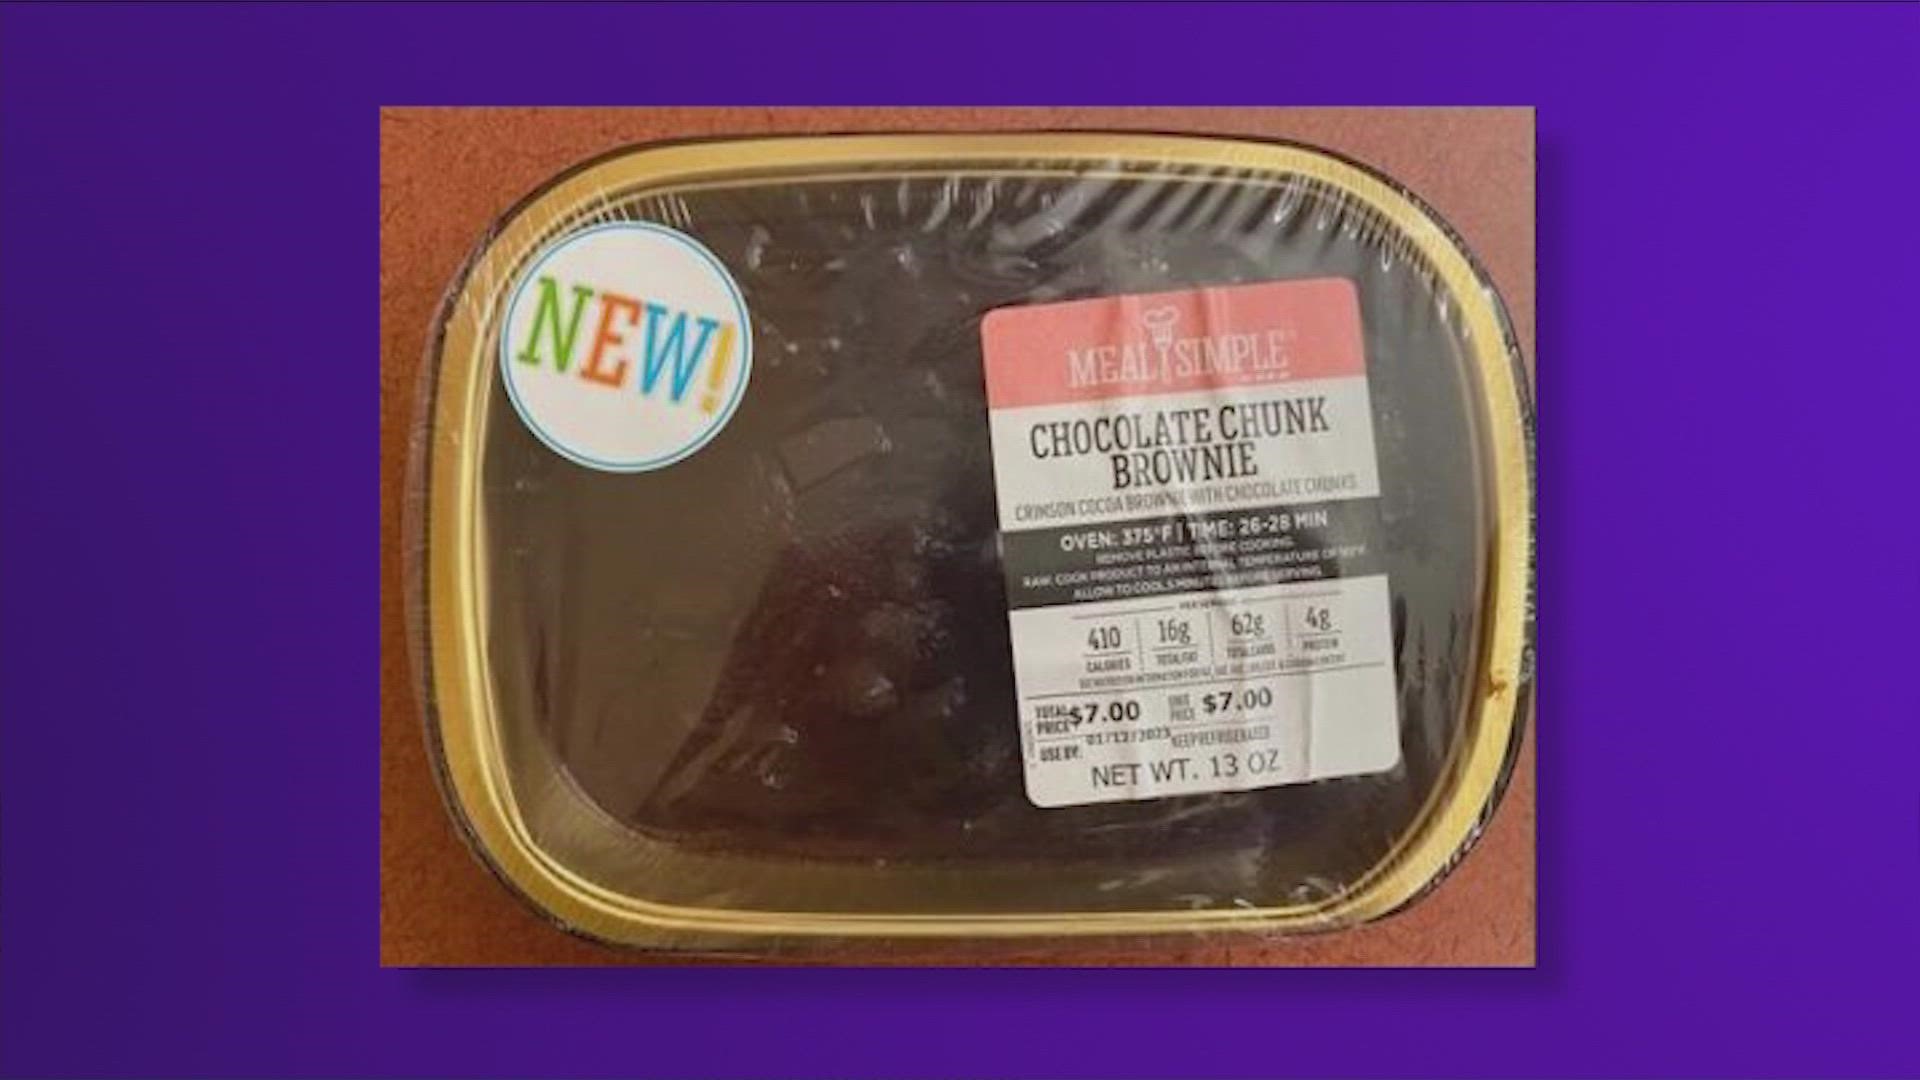 The item can be returned to your nearest H-E-B store for a full refund.